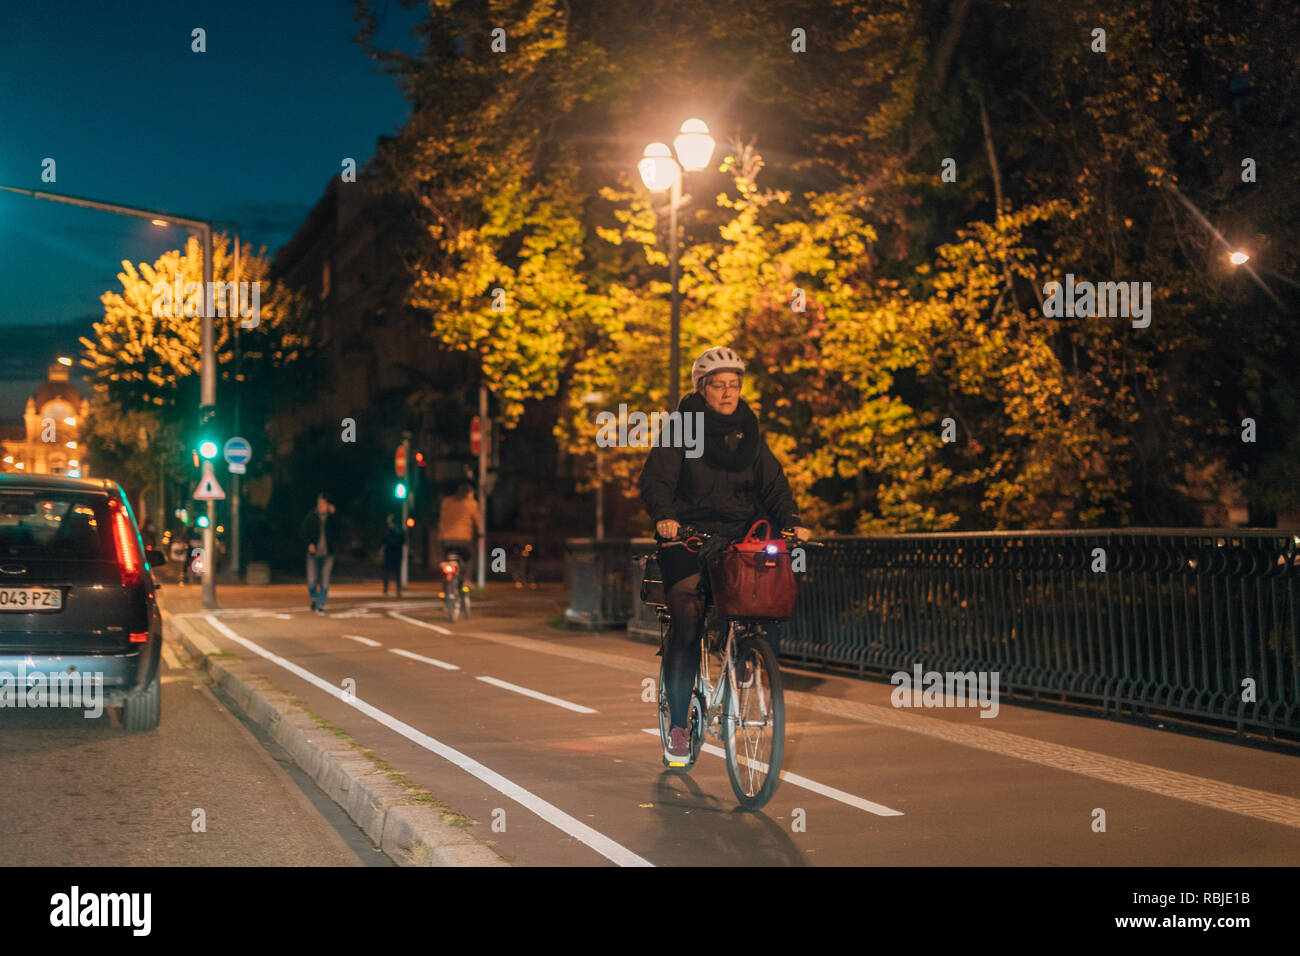 STRASBOURG, FRANCE - OCT 31, 2017: Senior woman riding a bike at night in central Strasbourg going home - wearing protection helmet  Stock Photo